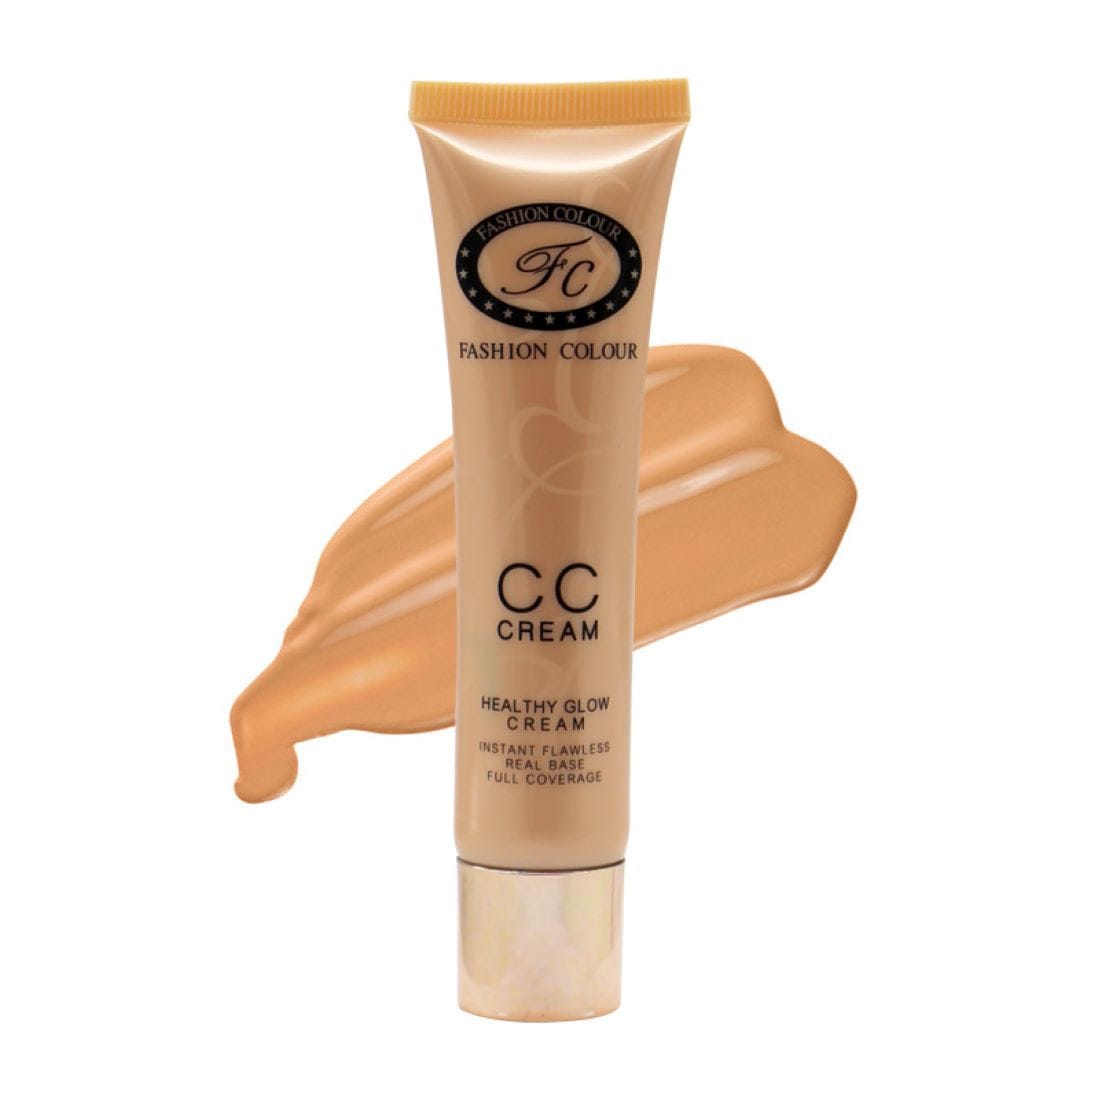 CC cream upon application, the texture melts into the skin, weightlessly concealing the appearance of imperfections and creating a long-lasting, no makeup feel. This full-coverage CC cream dresses the skin, enhances the look of facial features, and targets the appearance of fatigue. Contains an oil-absorbing powder that gives a long-lasting and flawless matt finish CC Cream protects your skin from harmful UVA and UVB rays and pollutants making your skin look healthy and your complexion naturally flawless.